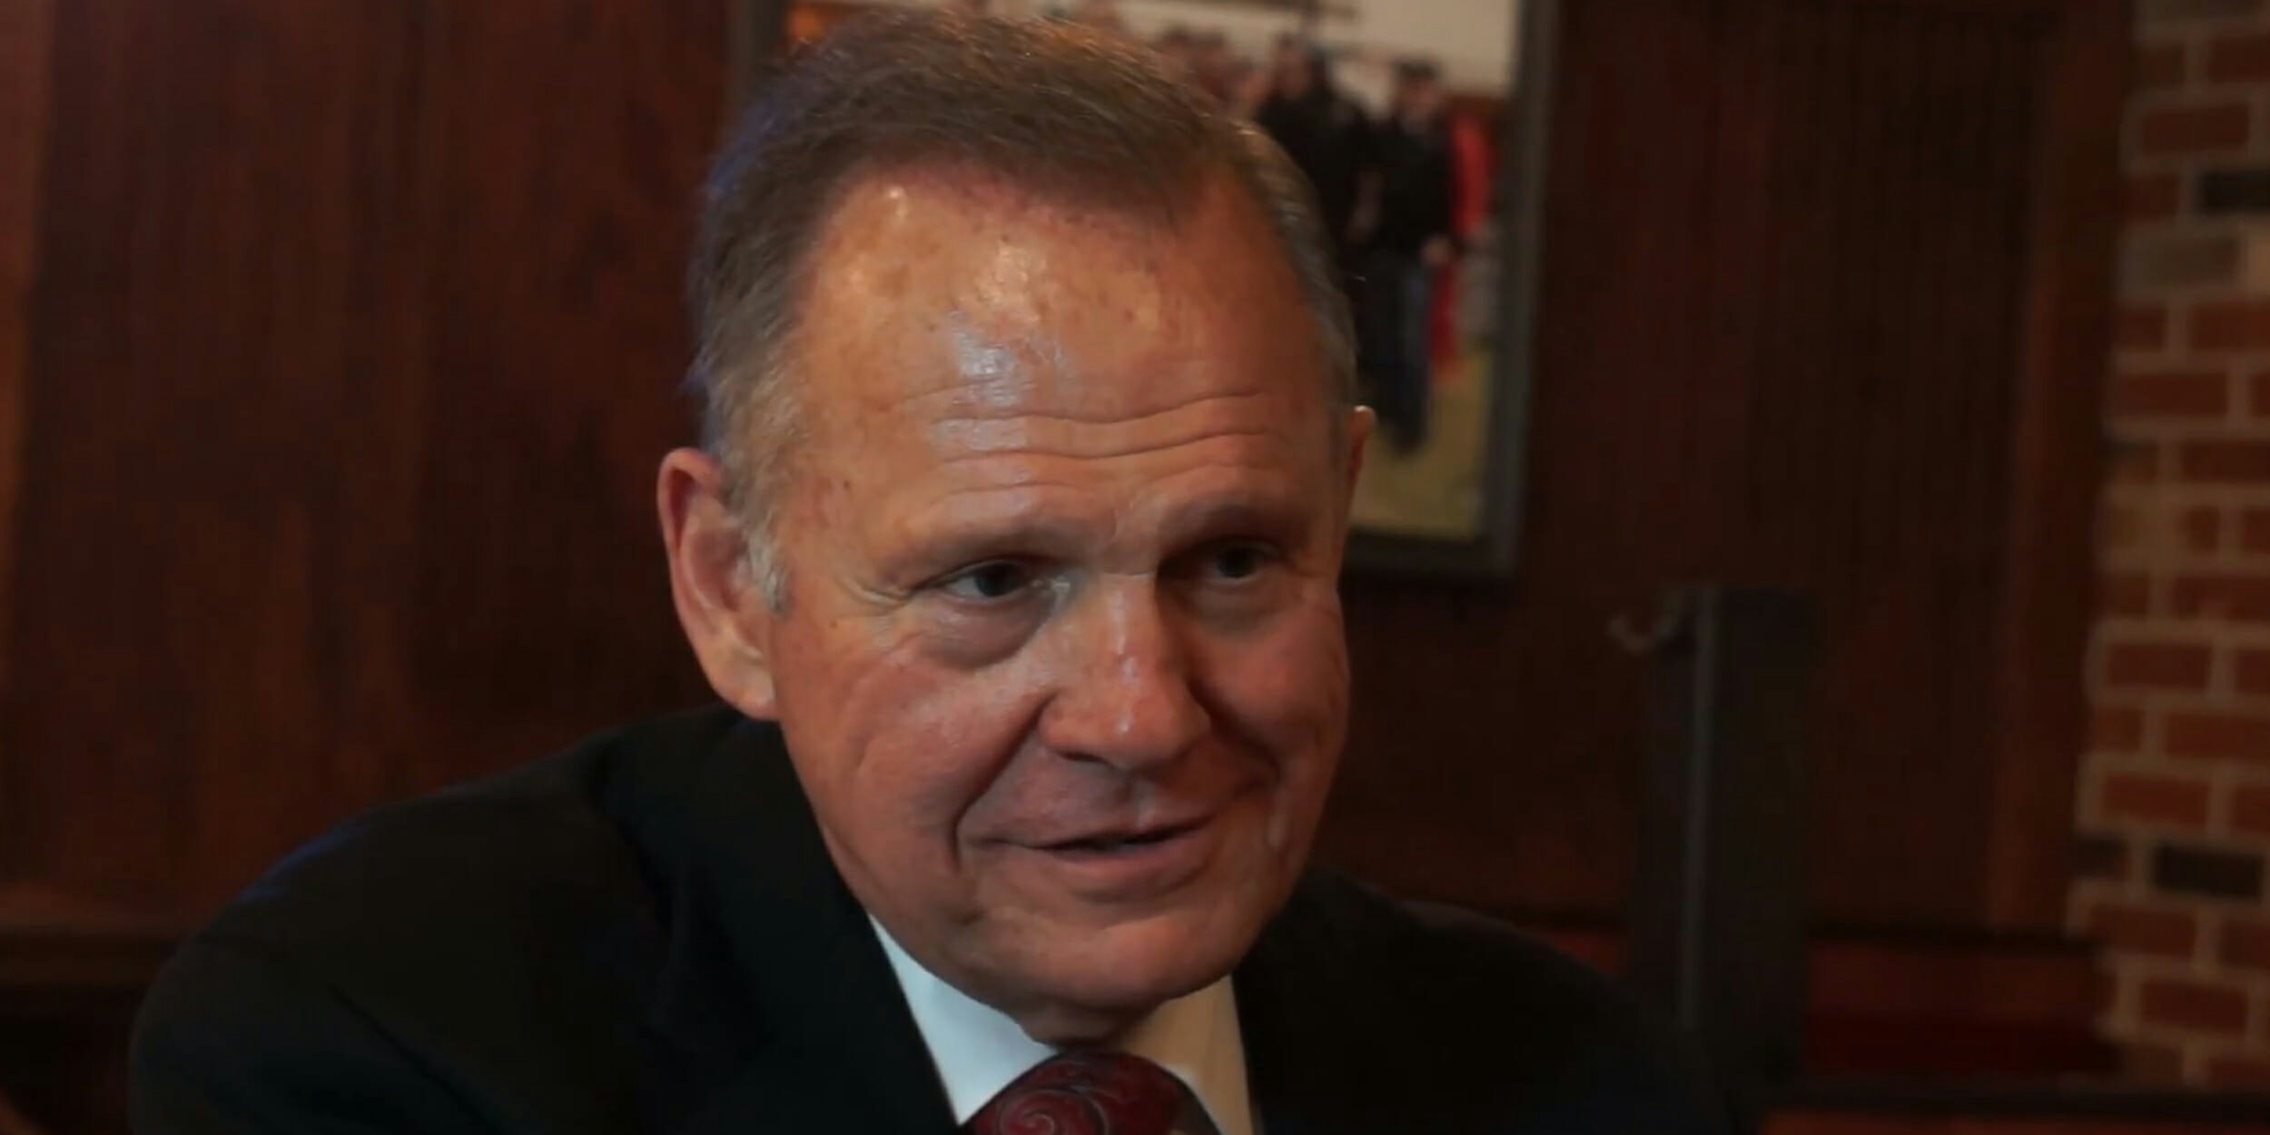 Alabama Senate candidate Roy Moore–who several woman say engaged in various forms of sexual misconduct with them, including when they were underage–said he first noticed his wife, Kayla Moore, when she was around 15-years-old.